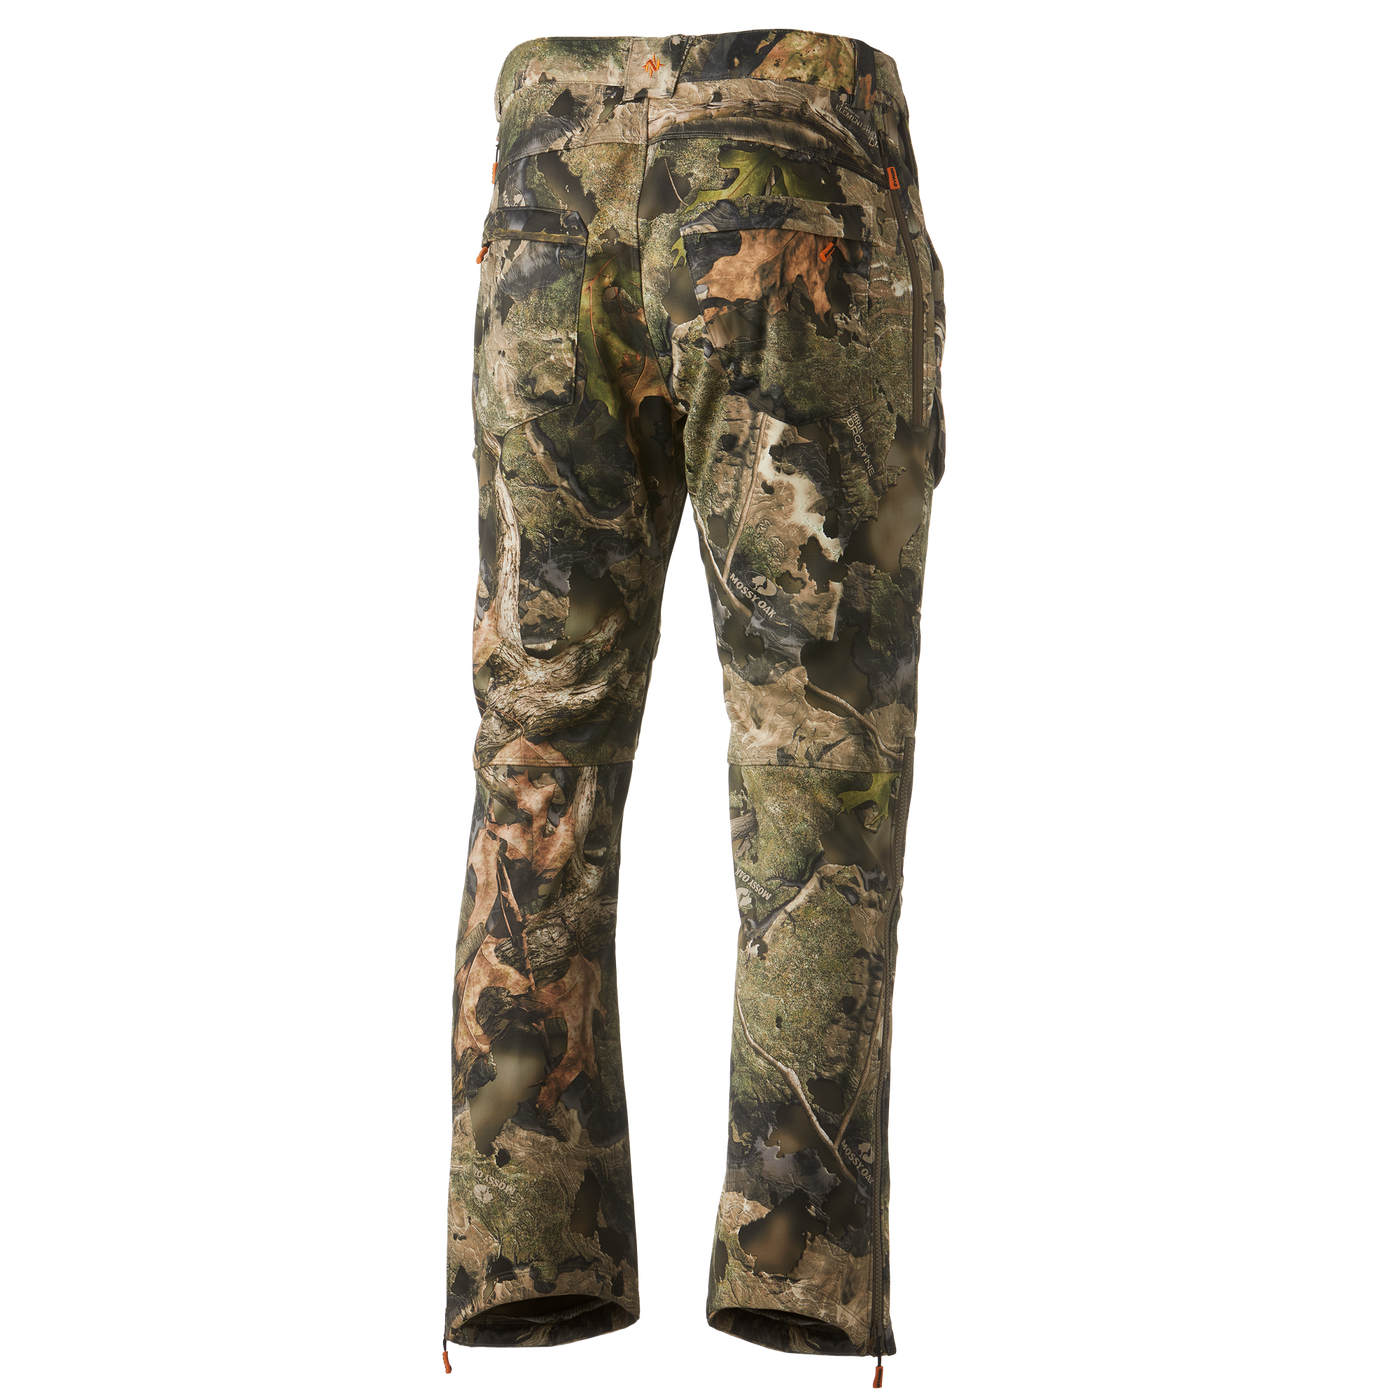 Nomad Barrier NXT Camo Pant